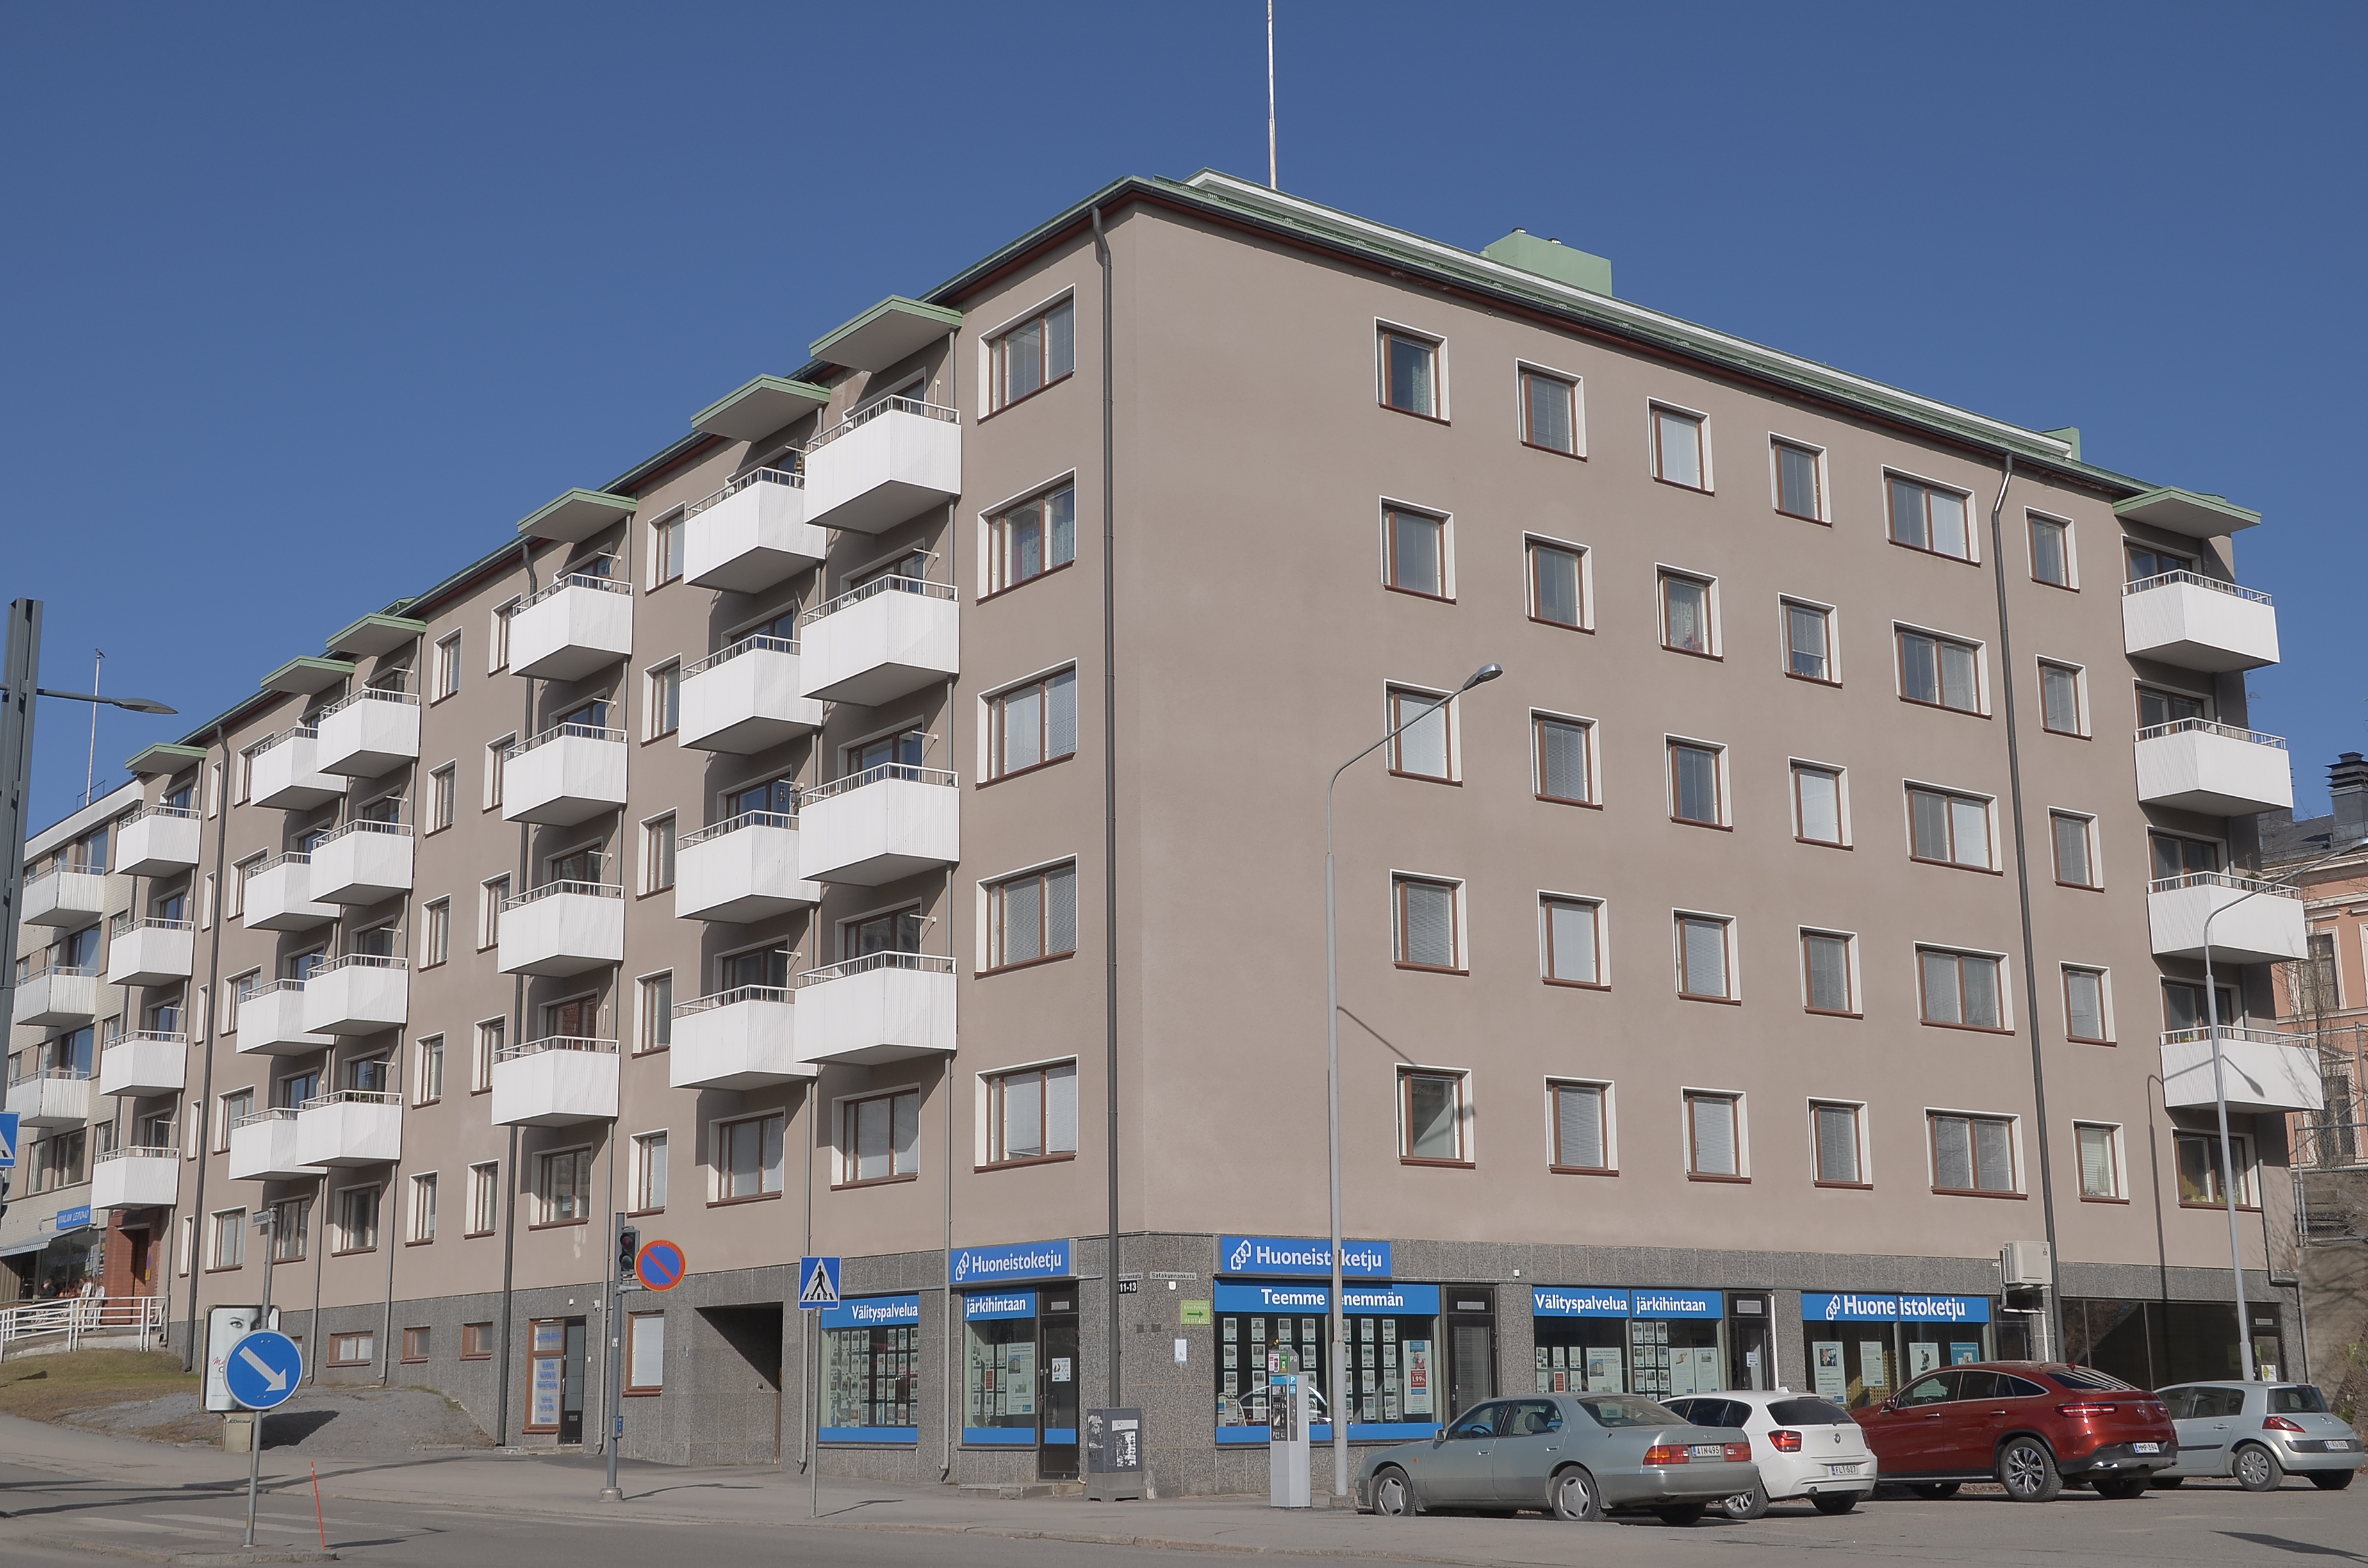 You are currently viewing As Oy Kirkonportti, Rautatienkatu 13, Tampere